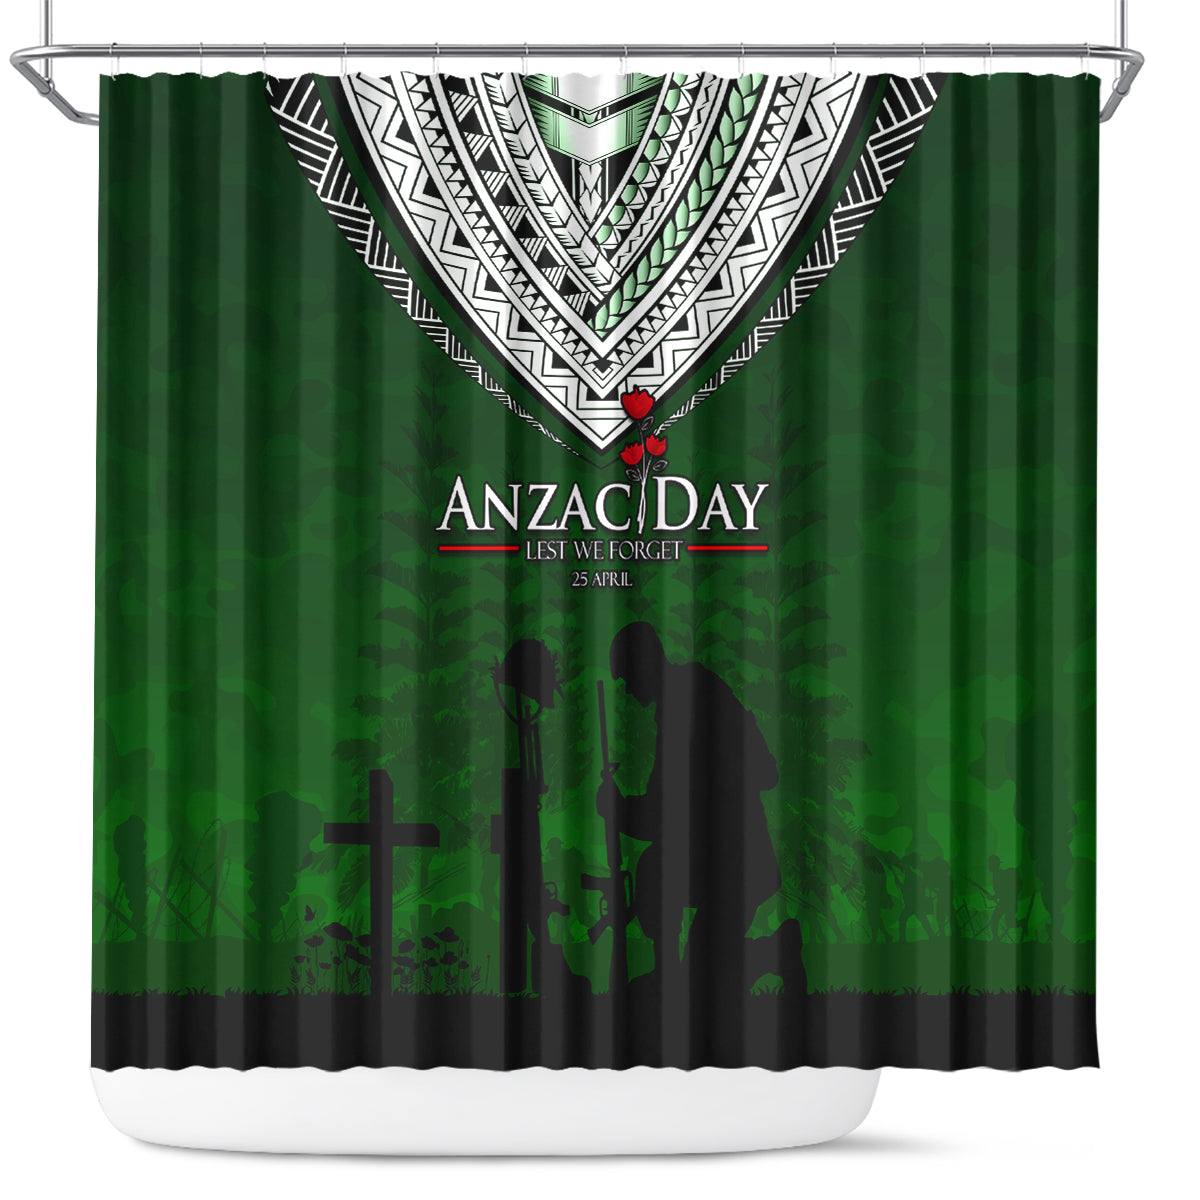 Norfolk Island ANZAC Day Shower Curtain Soldier Lest We Forget Camouflage LT03 Green - Polynesian Pride